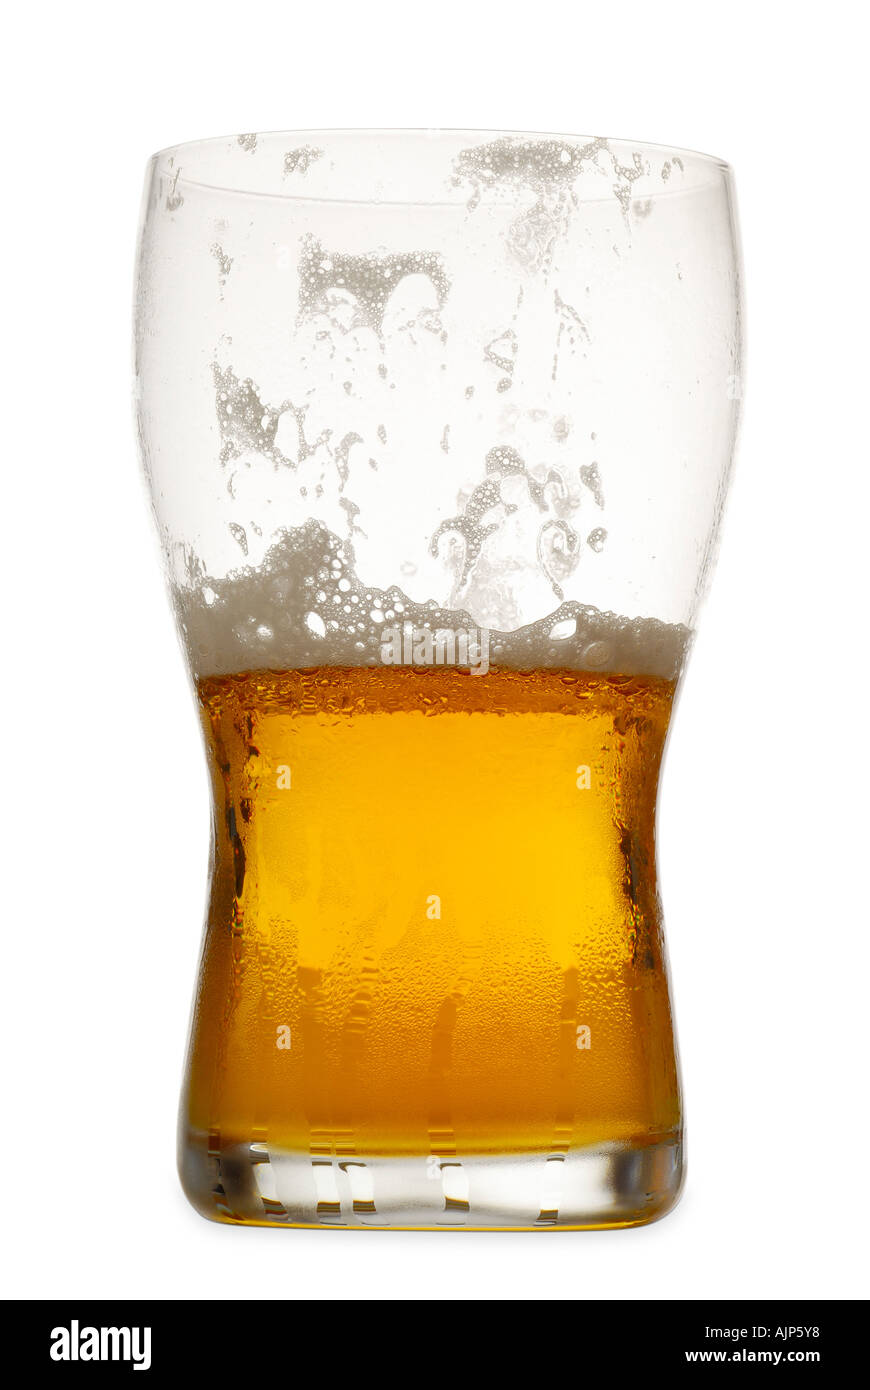 BEER HALF FULL PINT GLASS OF BEER LAGER SILHOUETTED ON WHITE BACKGROUND Stock Photo